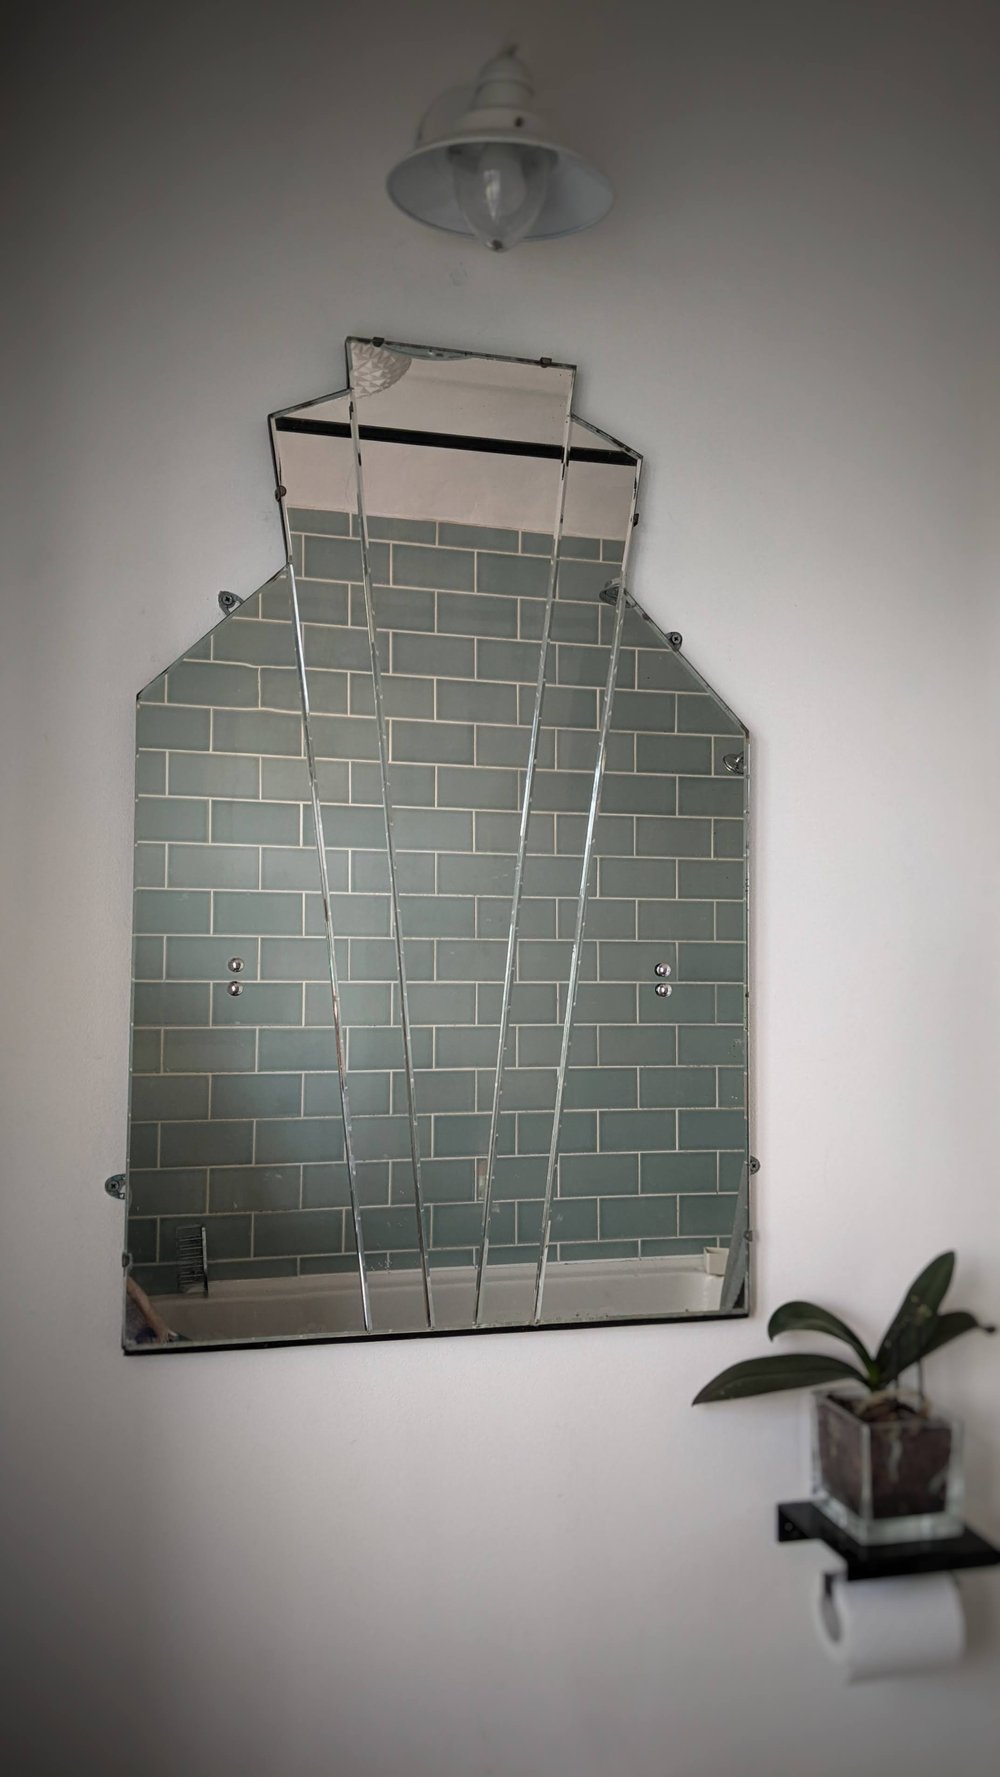 An inherited art deco mirror and ex-display light for our 1930s home